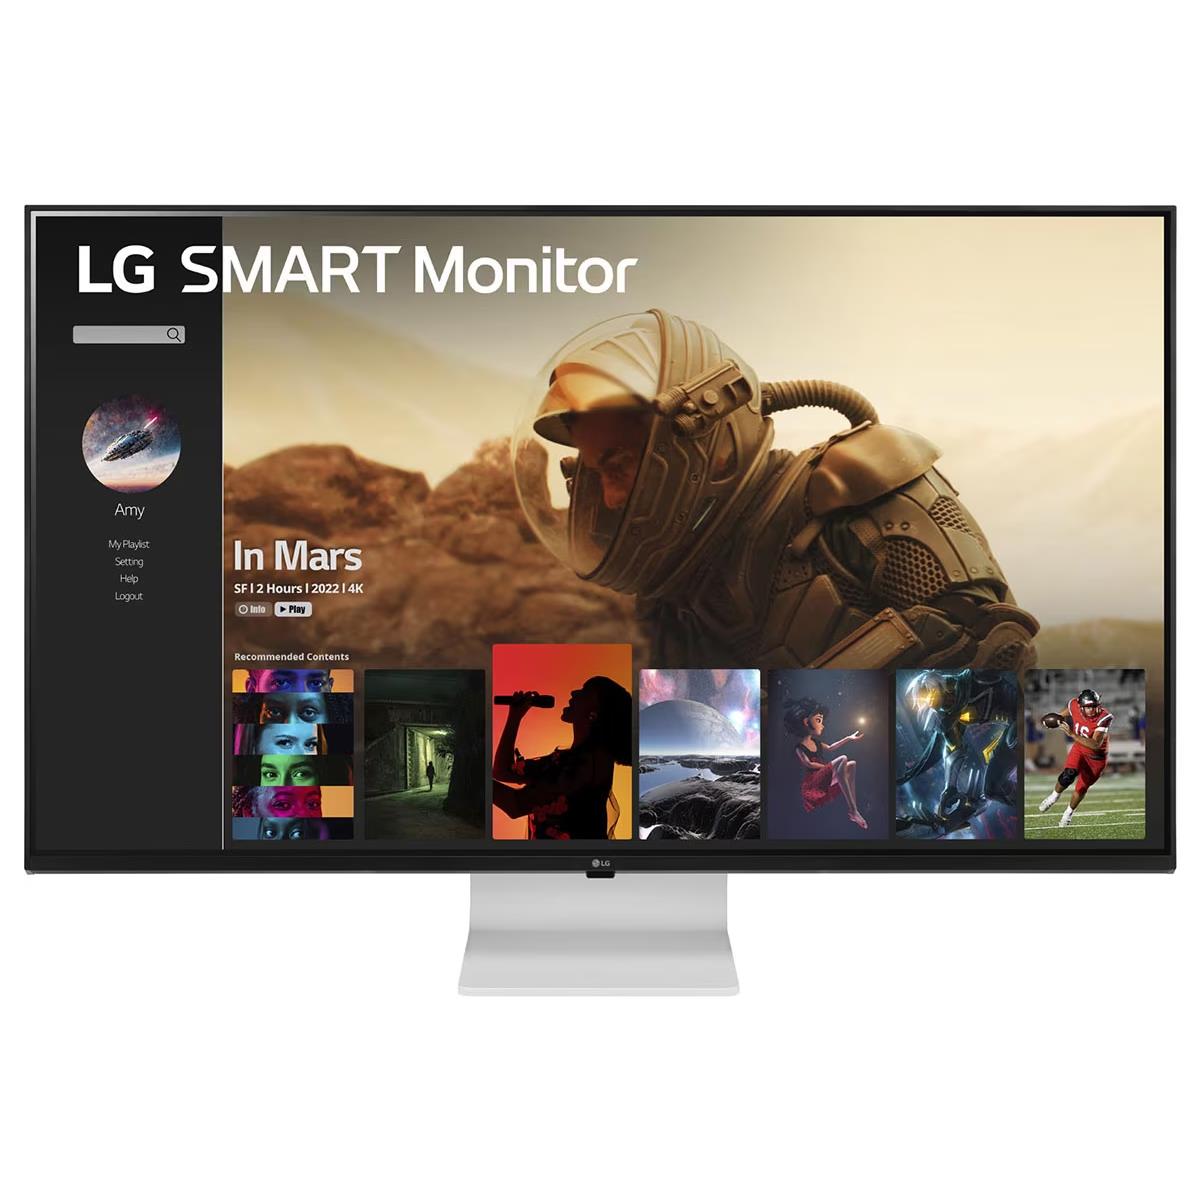 42.5" 16:9 4K Ultra HD IPS LCD HDR Smart Monitor with webOS - LG 43SQ700S-W